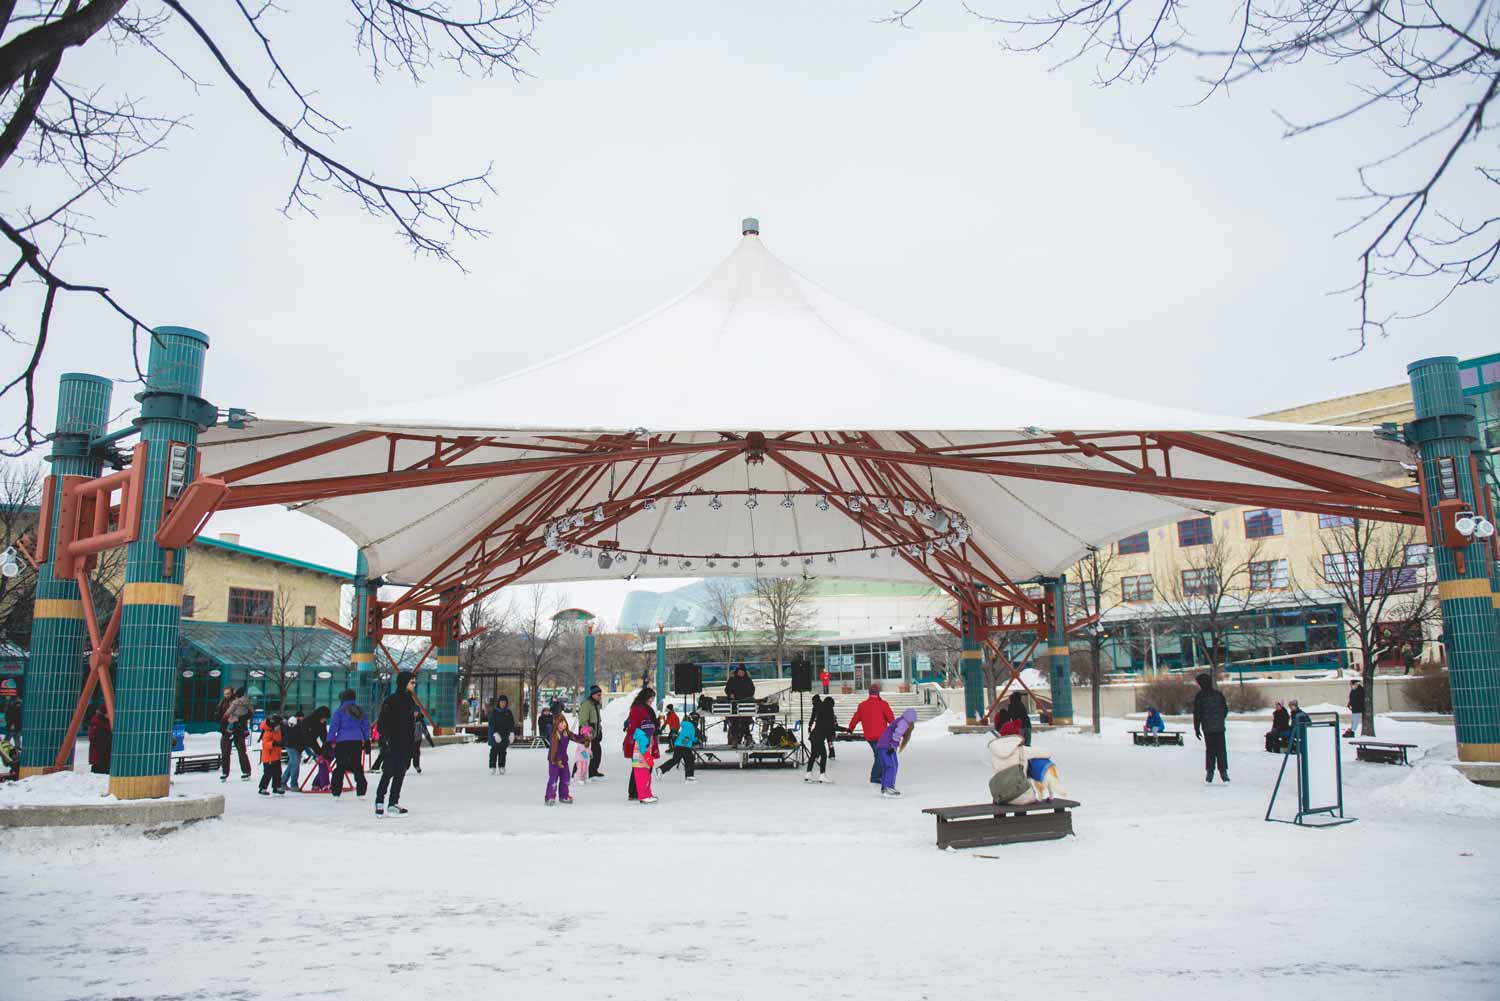 People skating under the white tent canopy of the Market Plaza in 2015